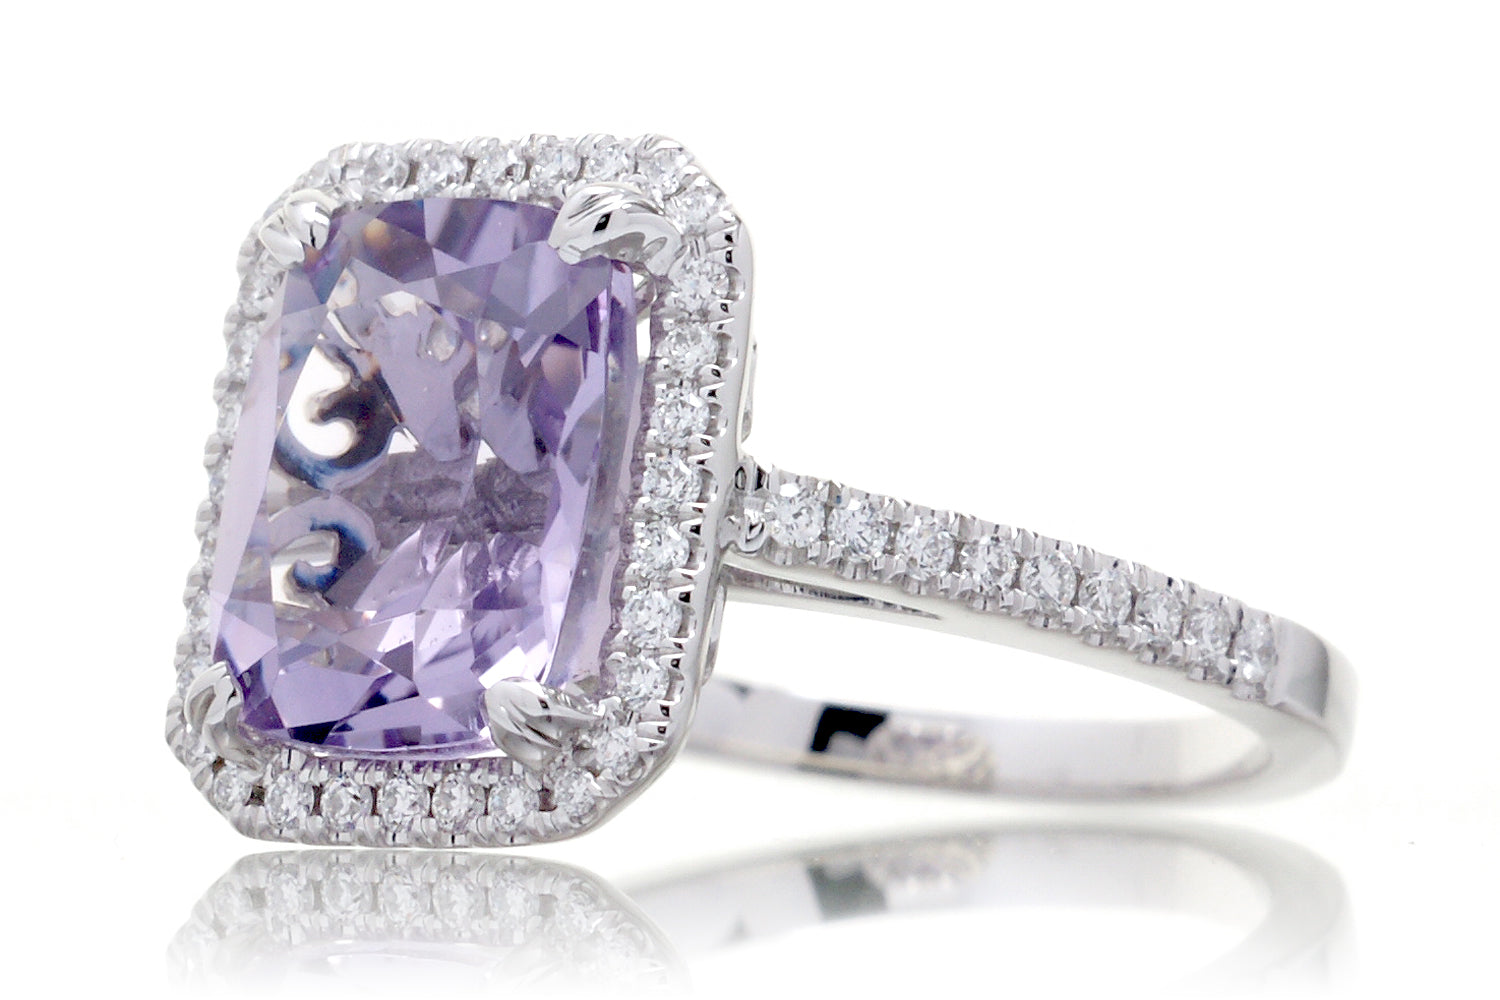 The Signature Cushion Rose De France Amethyst Engagement Ring